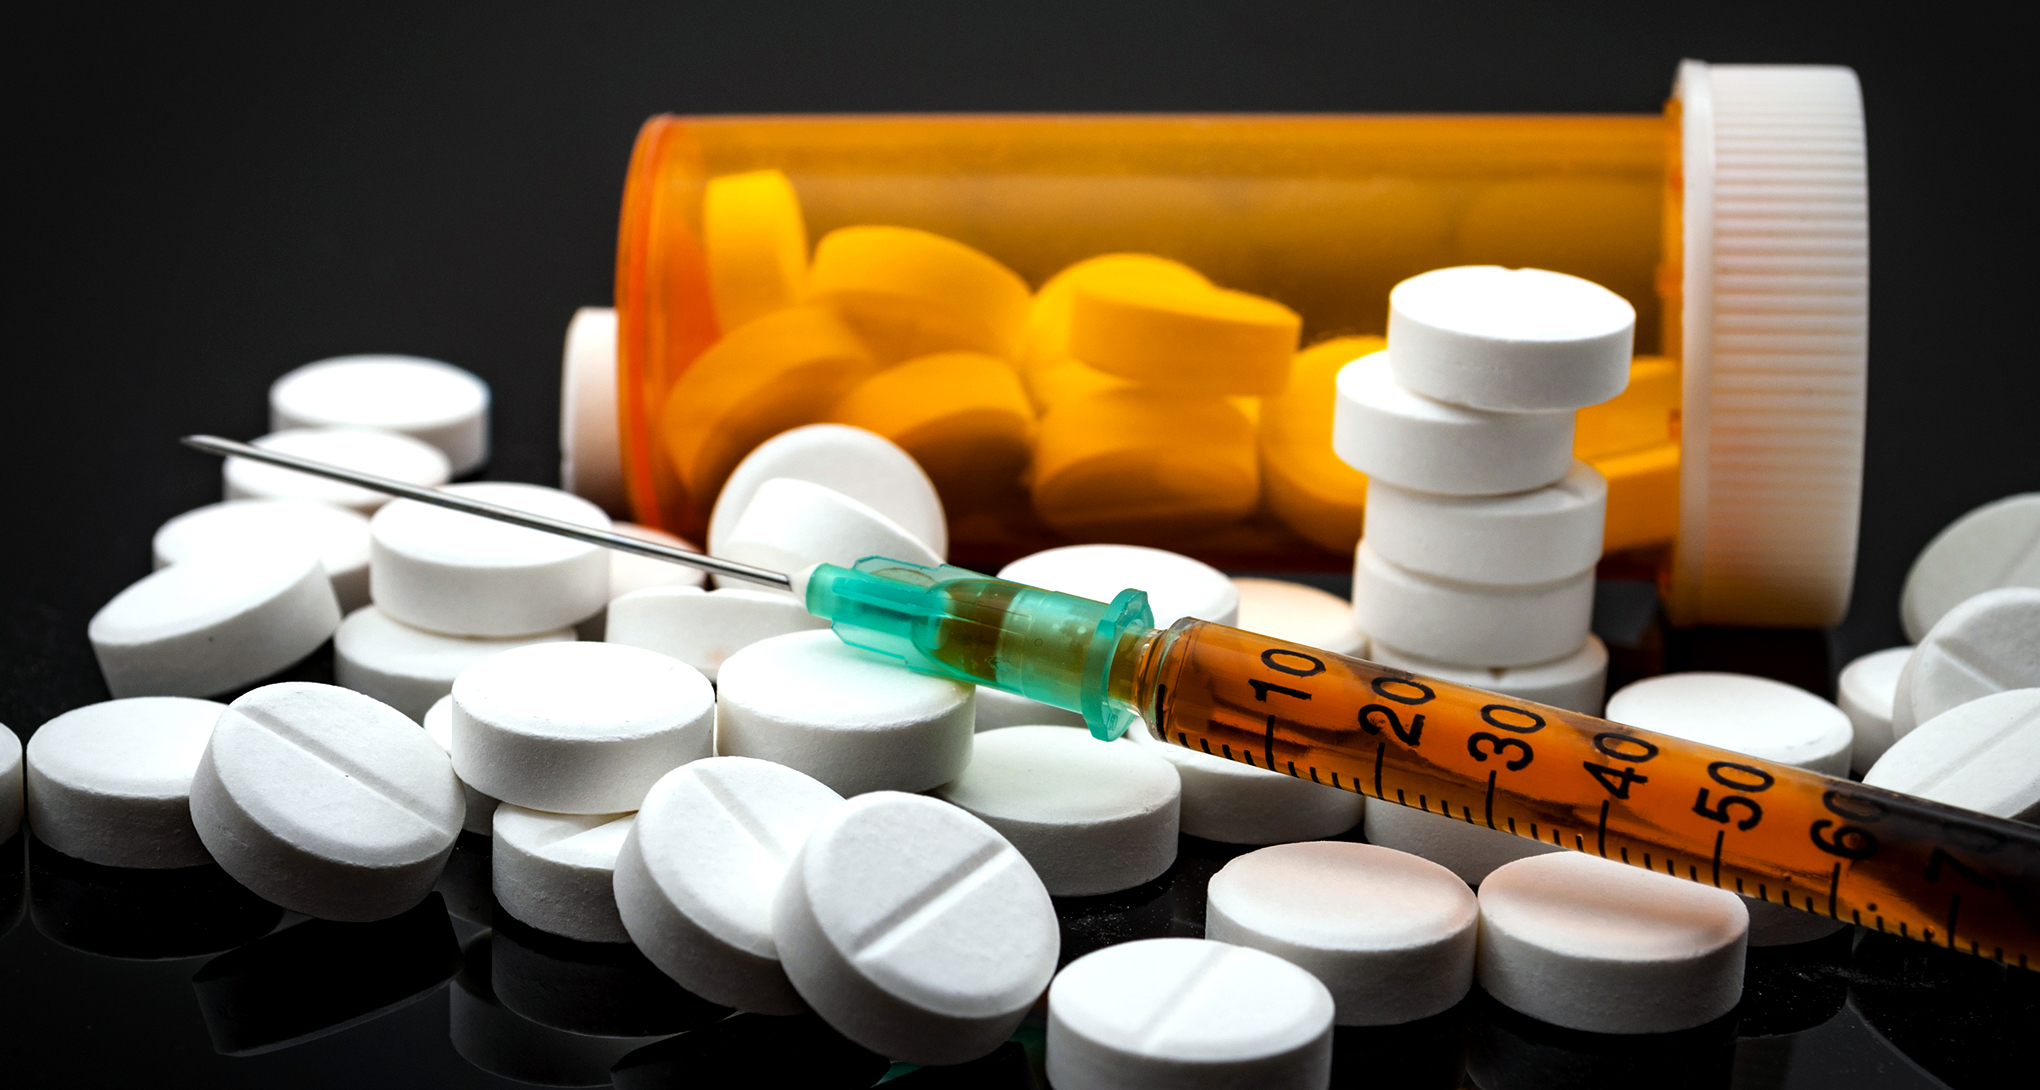 Opioid overdose is a leading cause of accidental death in America